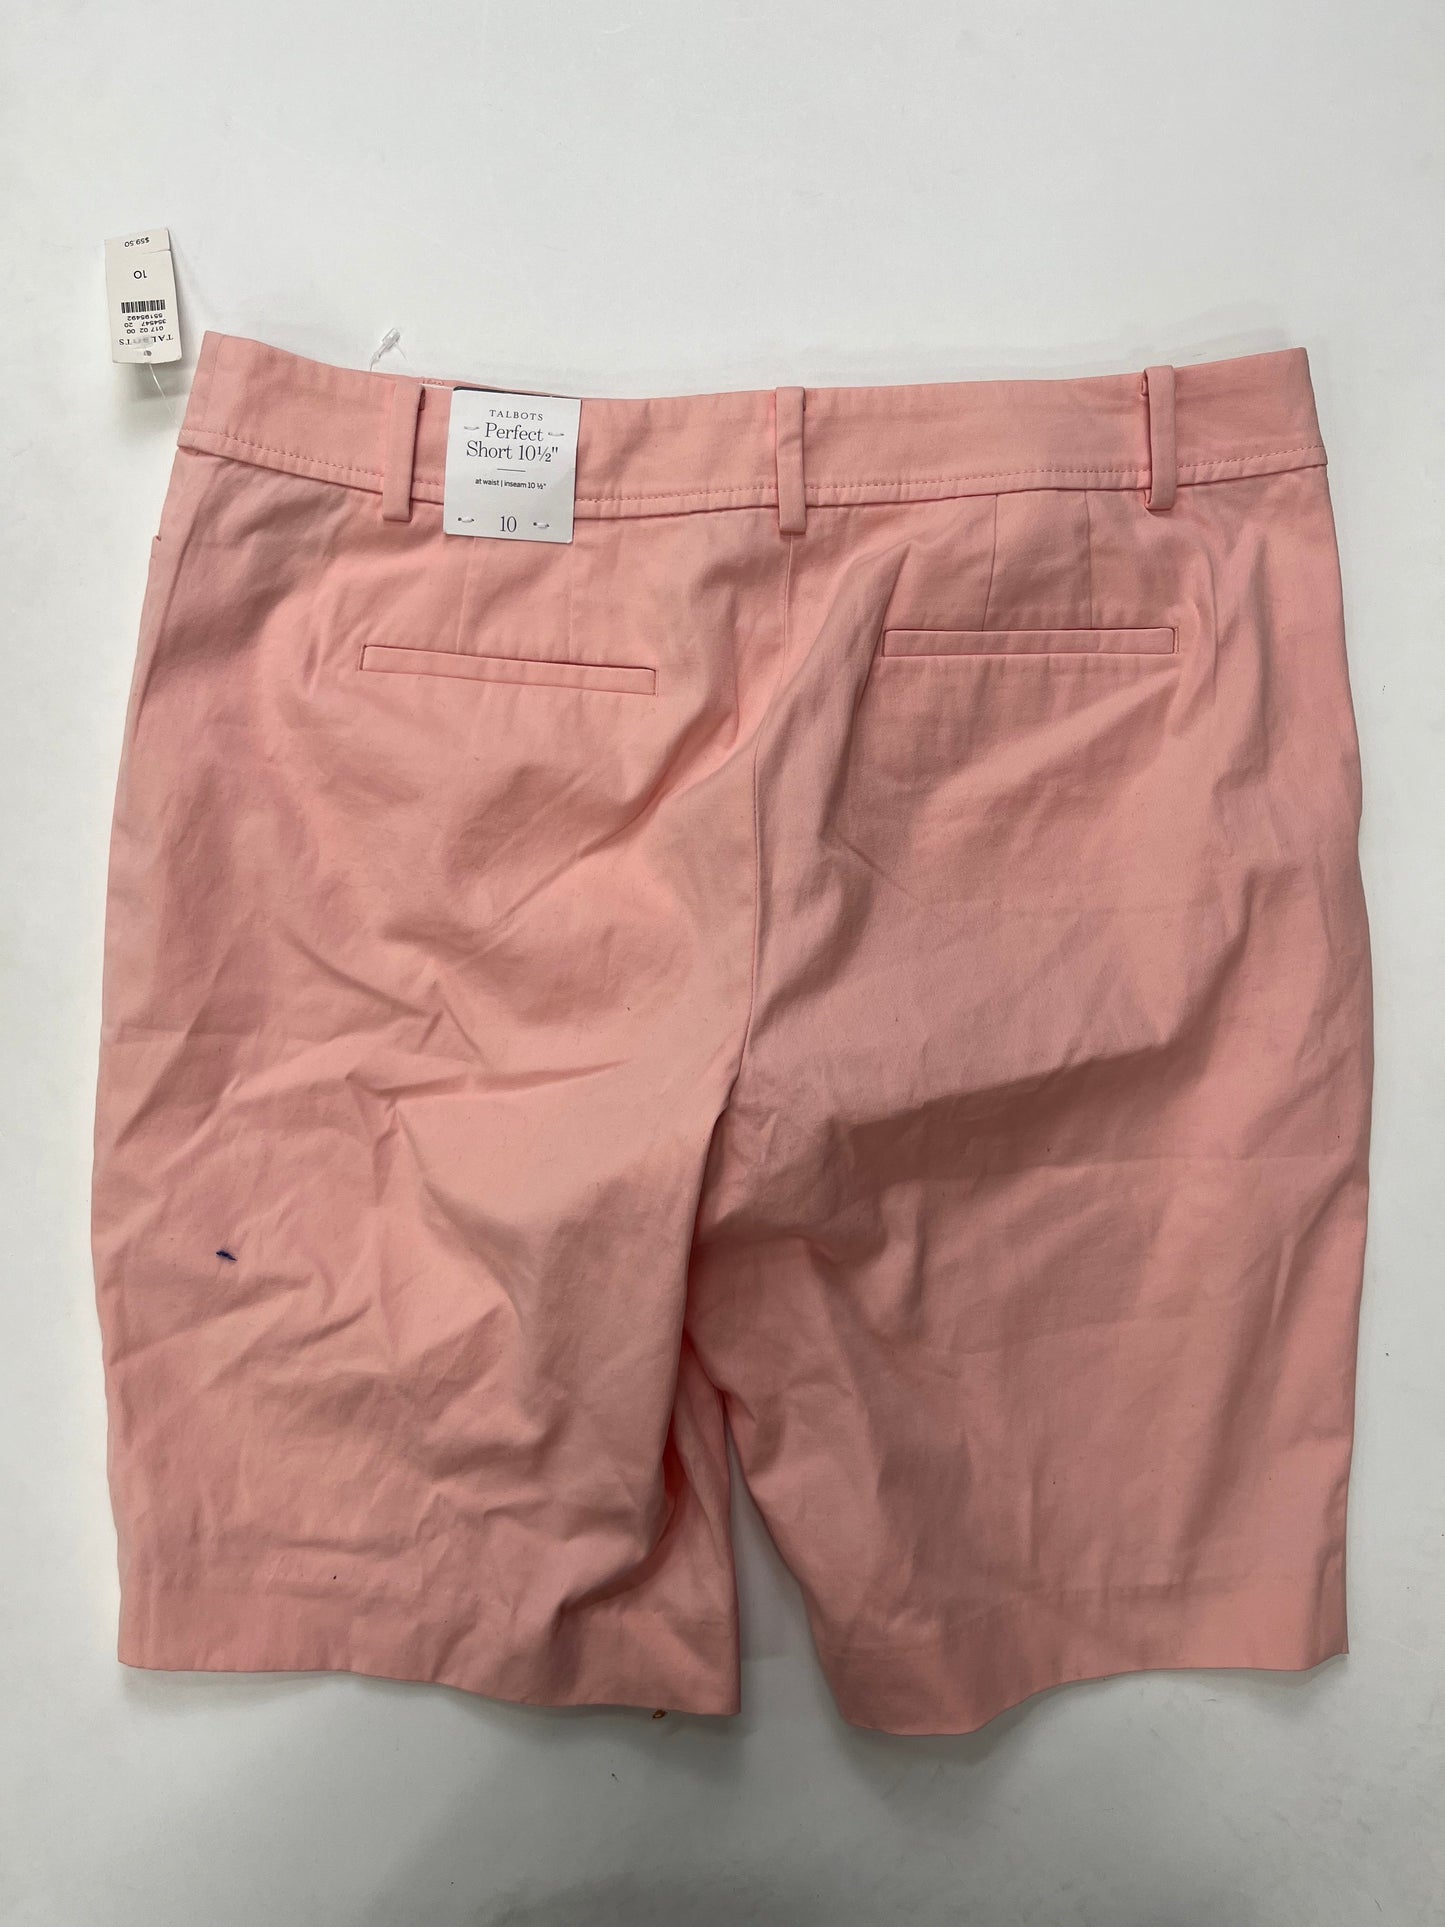 Shorts By Talbots NWT Size: 10